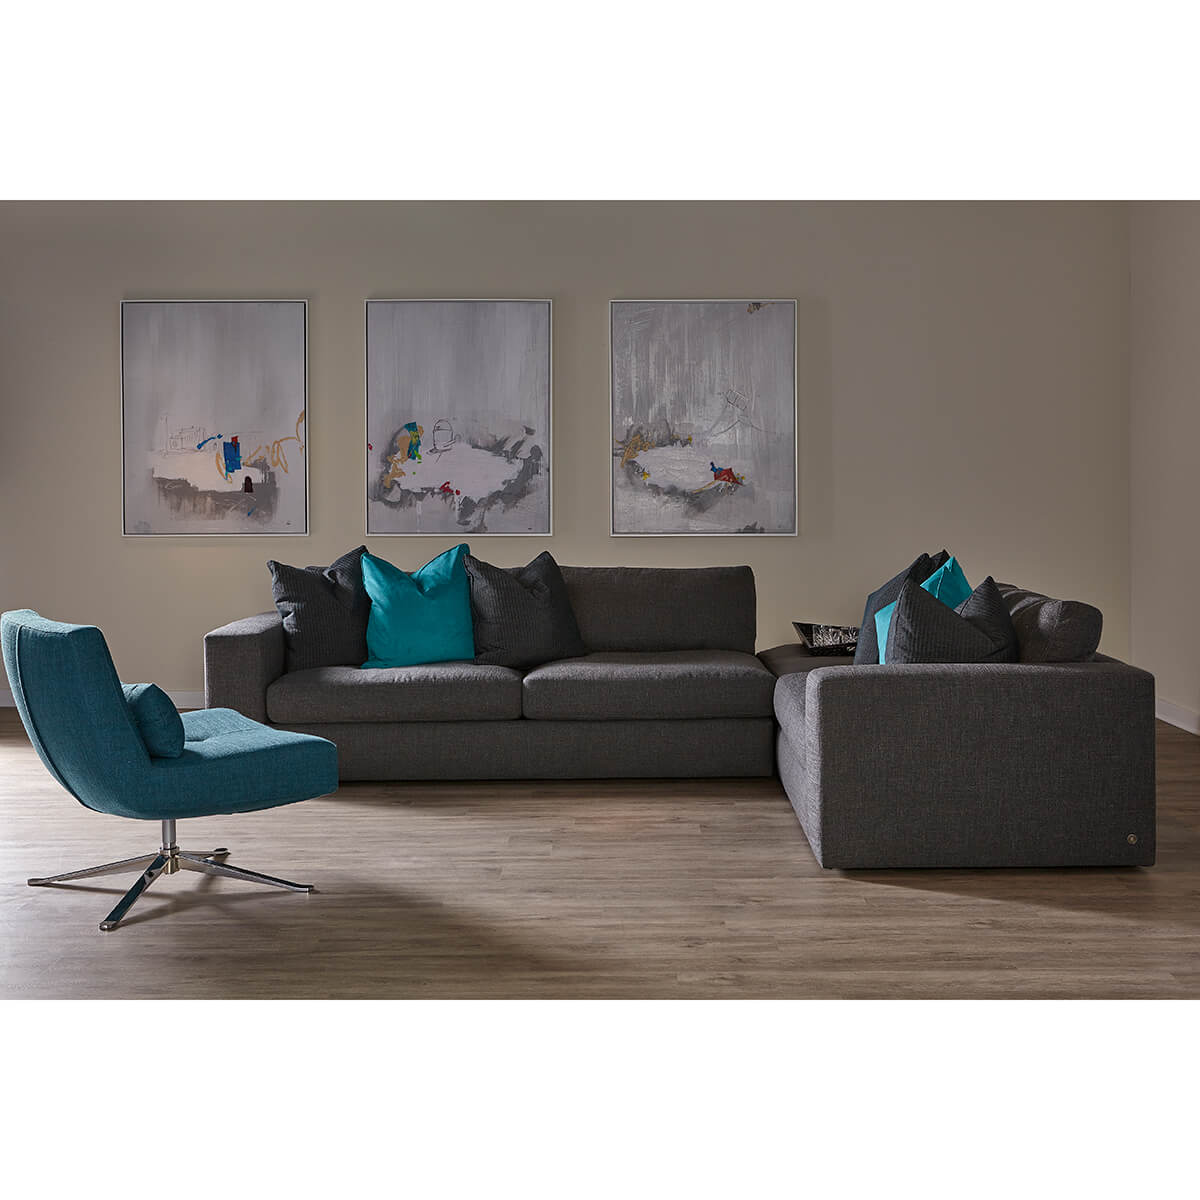 Read more about the article Steve/Hugo Living Room Collection